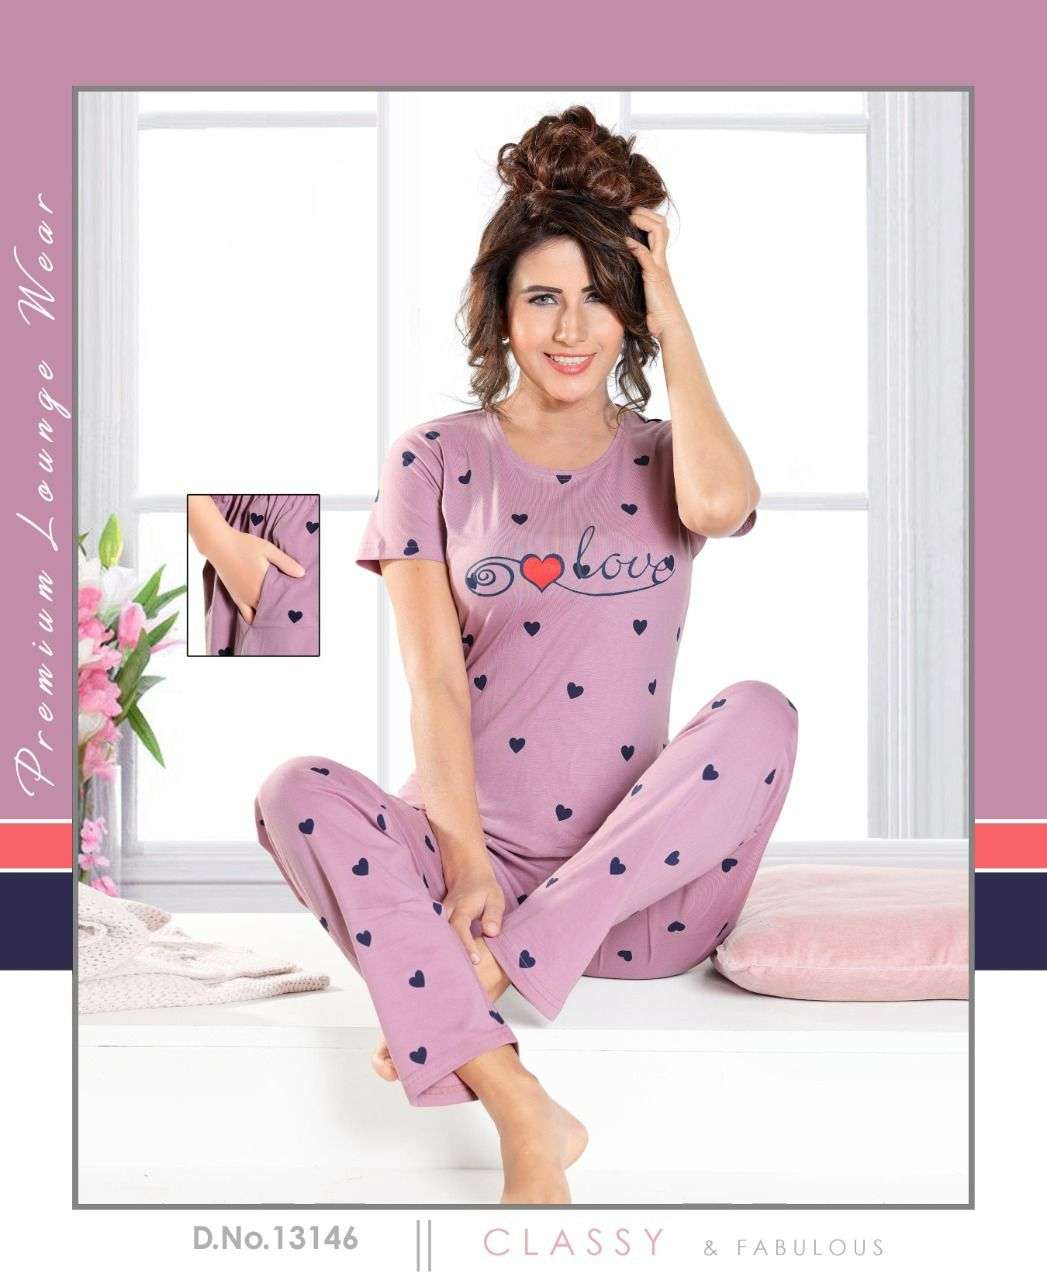 nightsuit collection for women collection mill printed hosiery cotton soft comfortable nightsuit for ladies in affordable price 